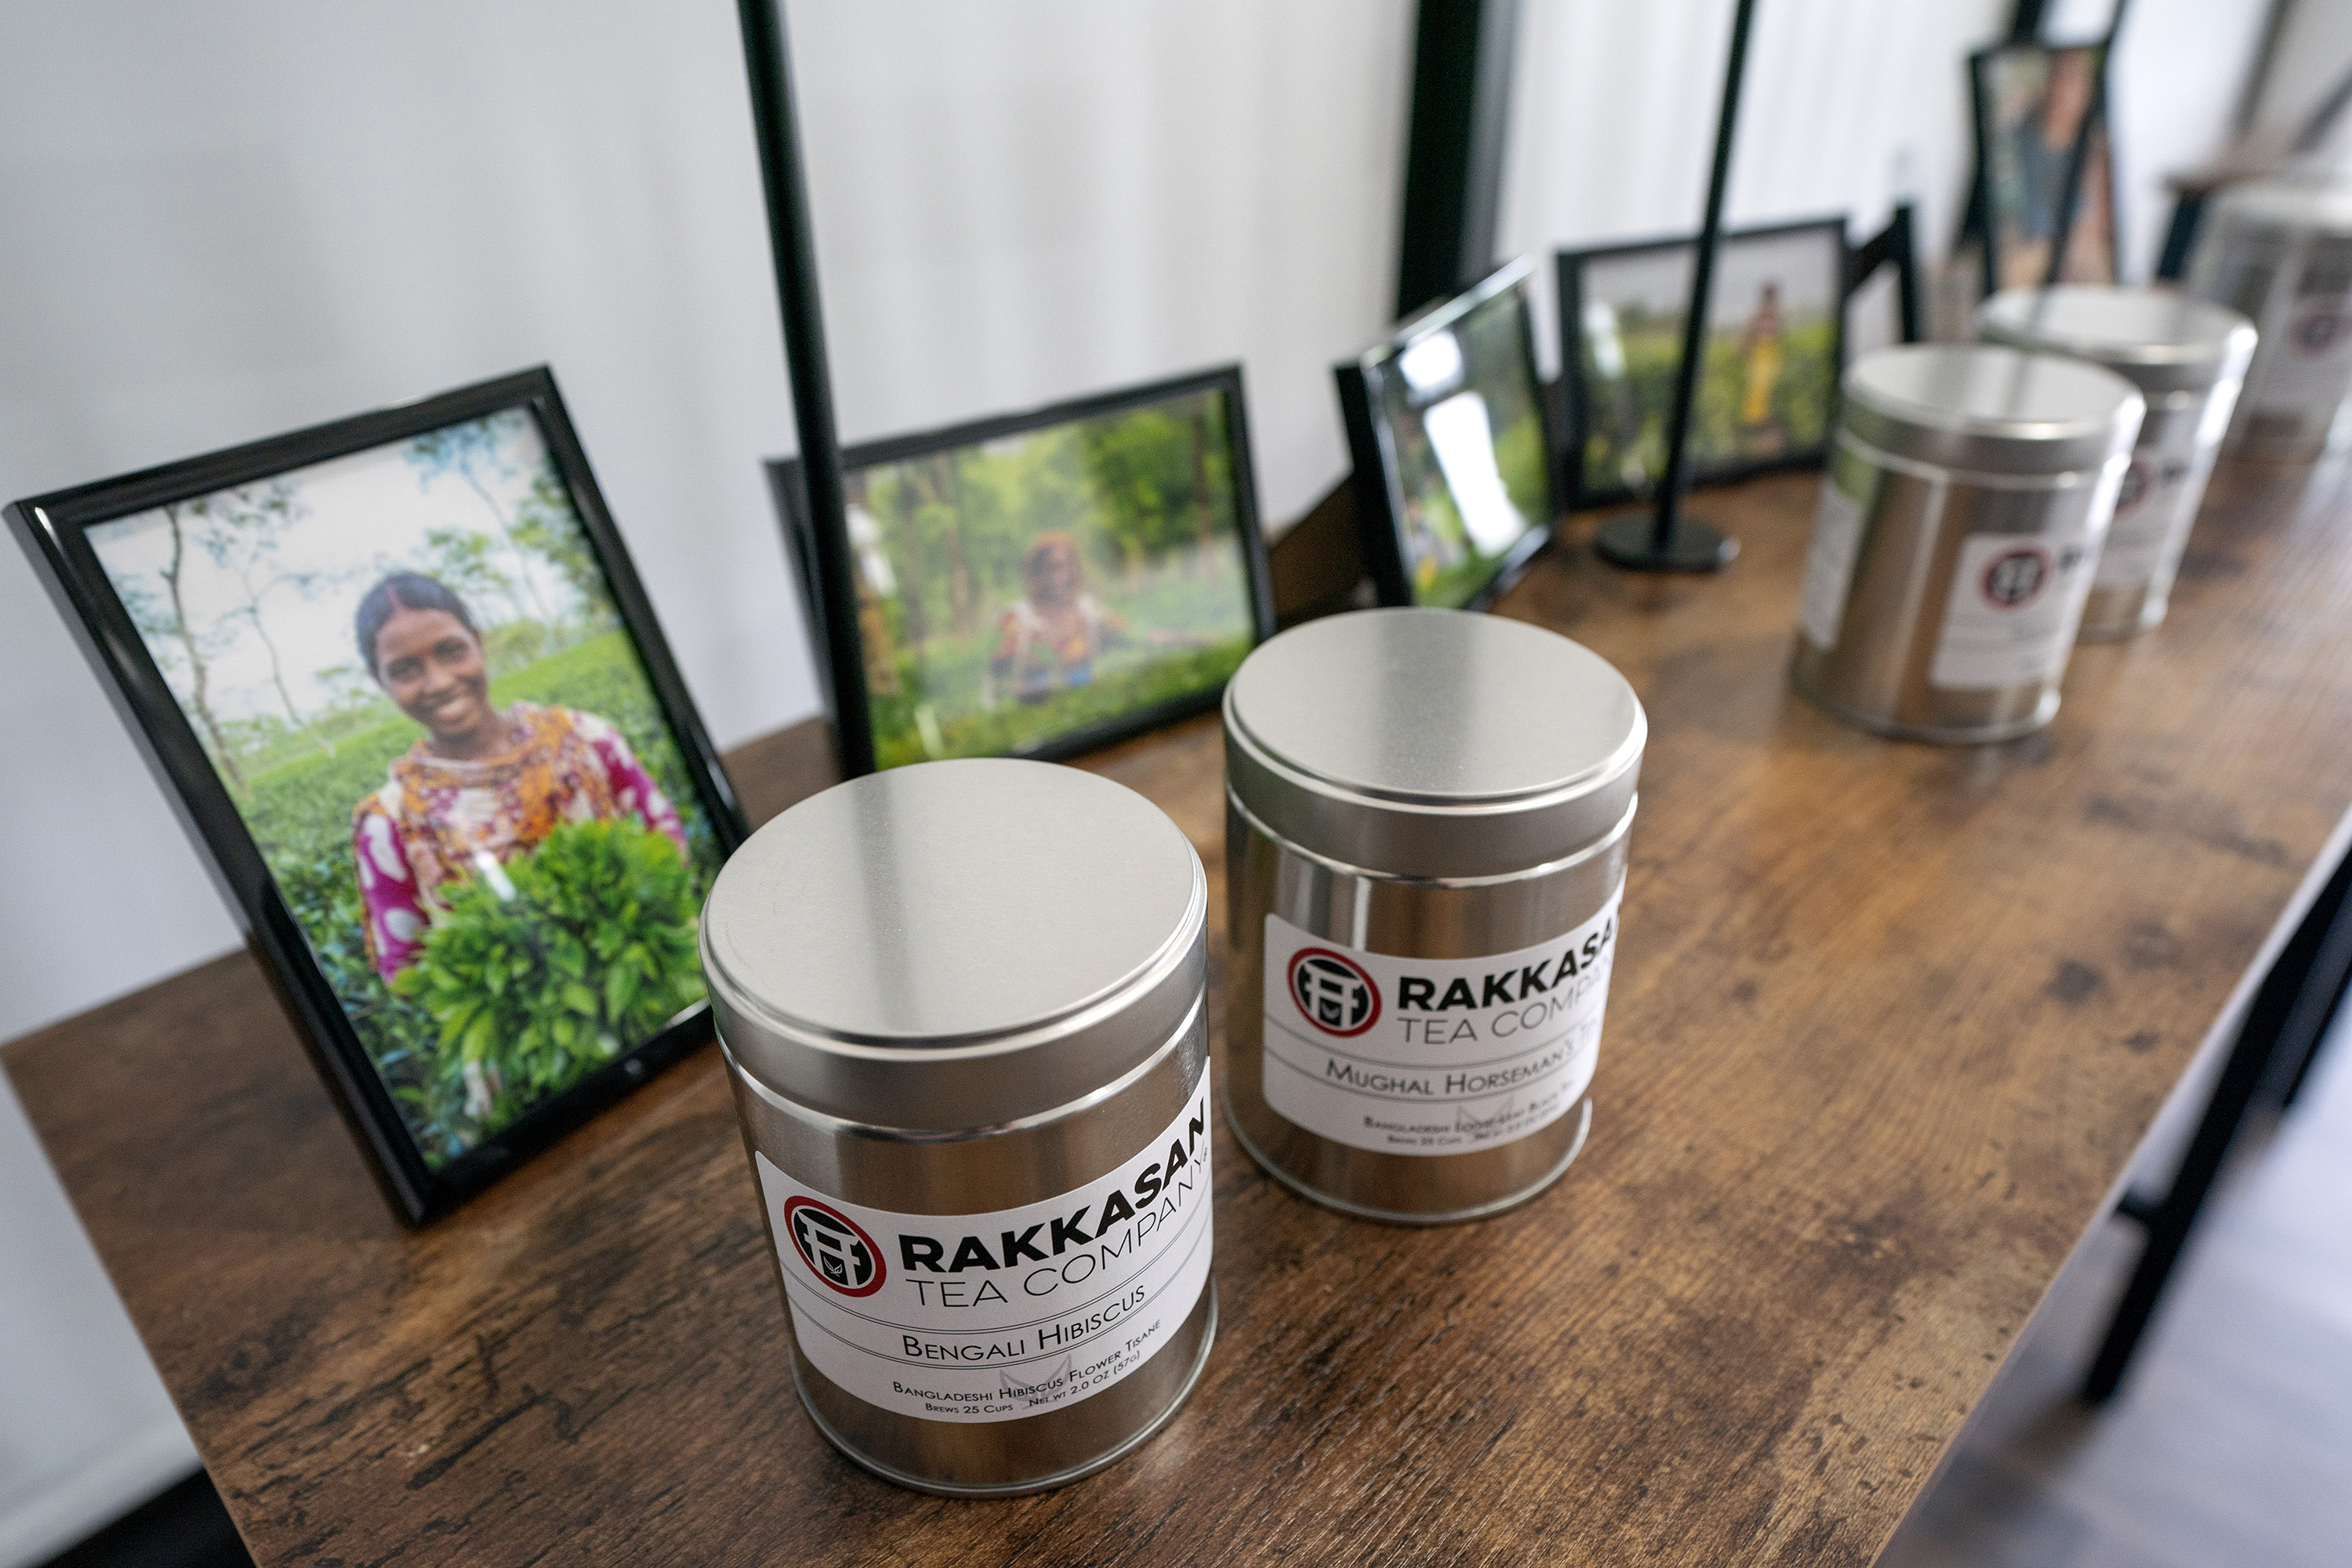 Canisters of Rakkasan Tea sit in front of photos of tea growers from the countries where the tea was sourced .